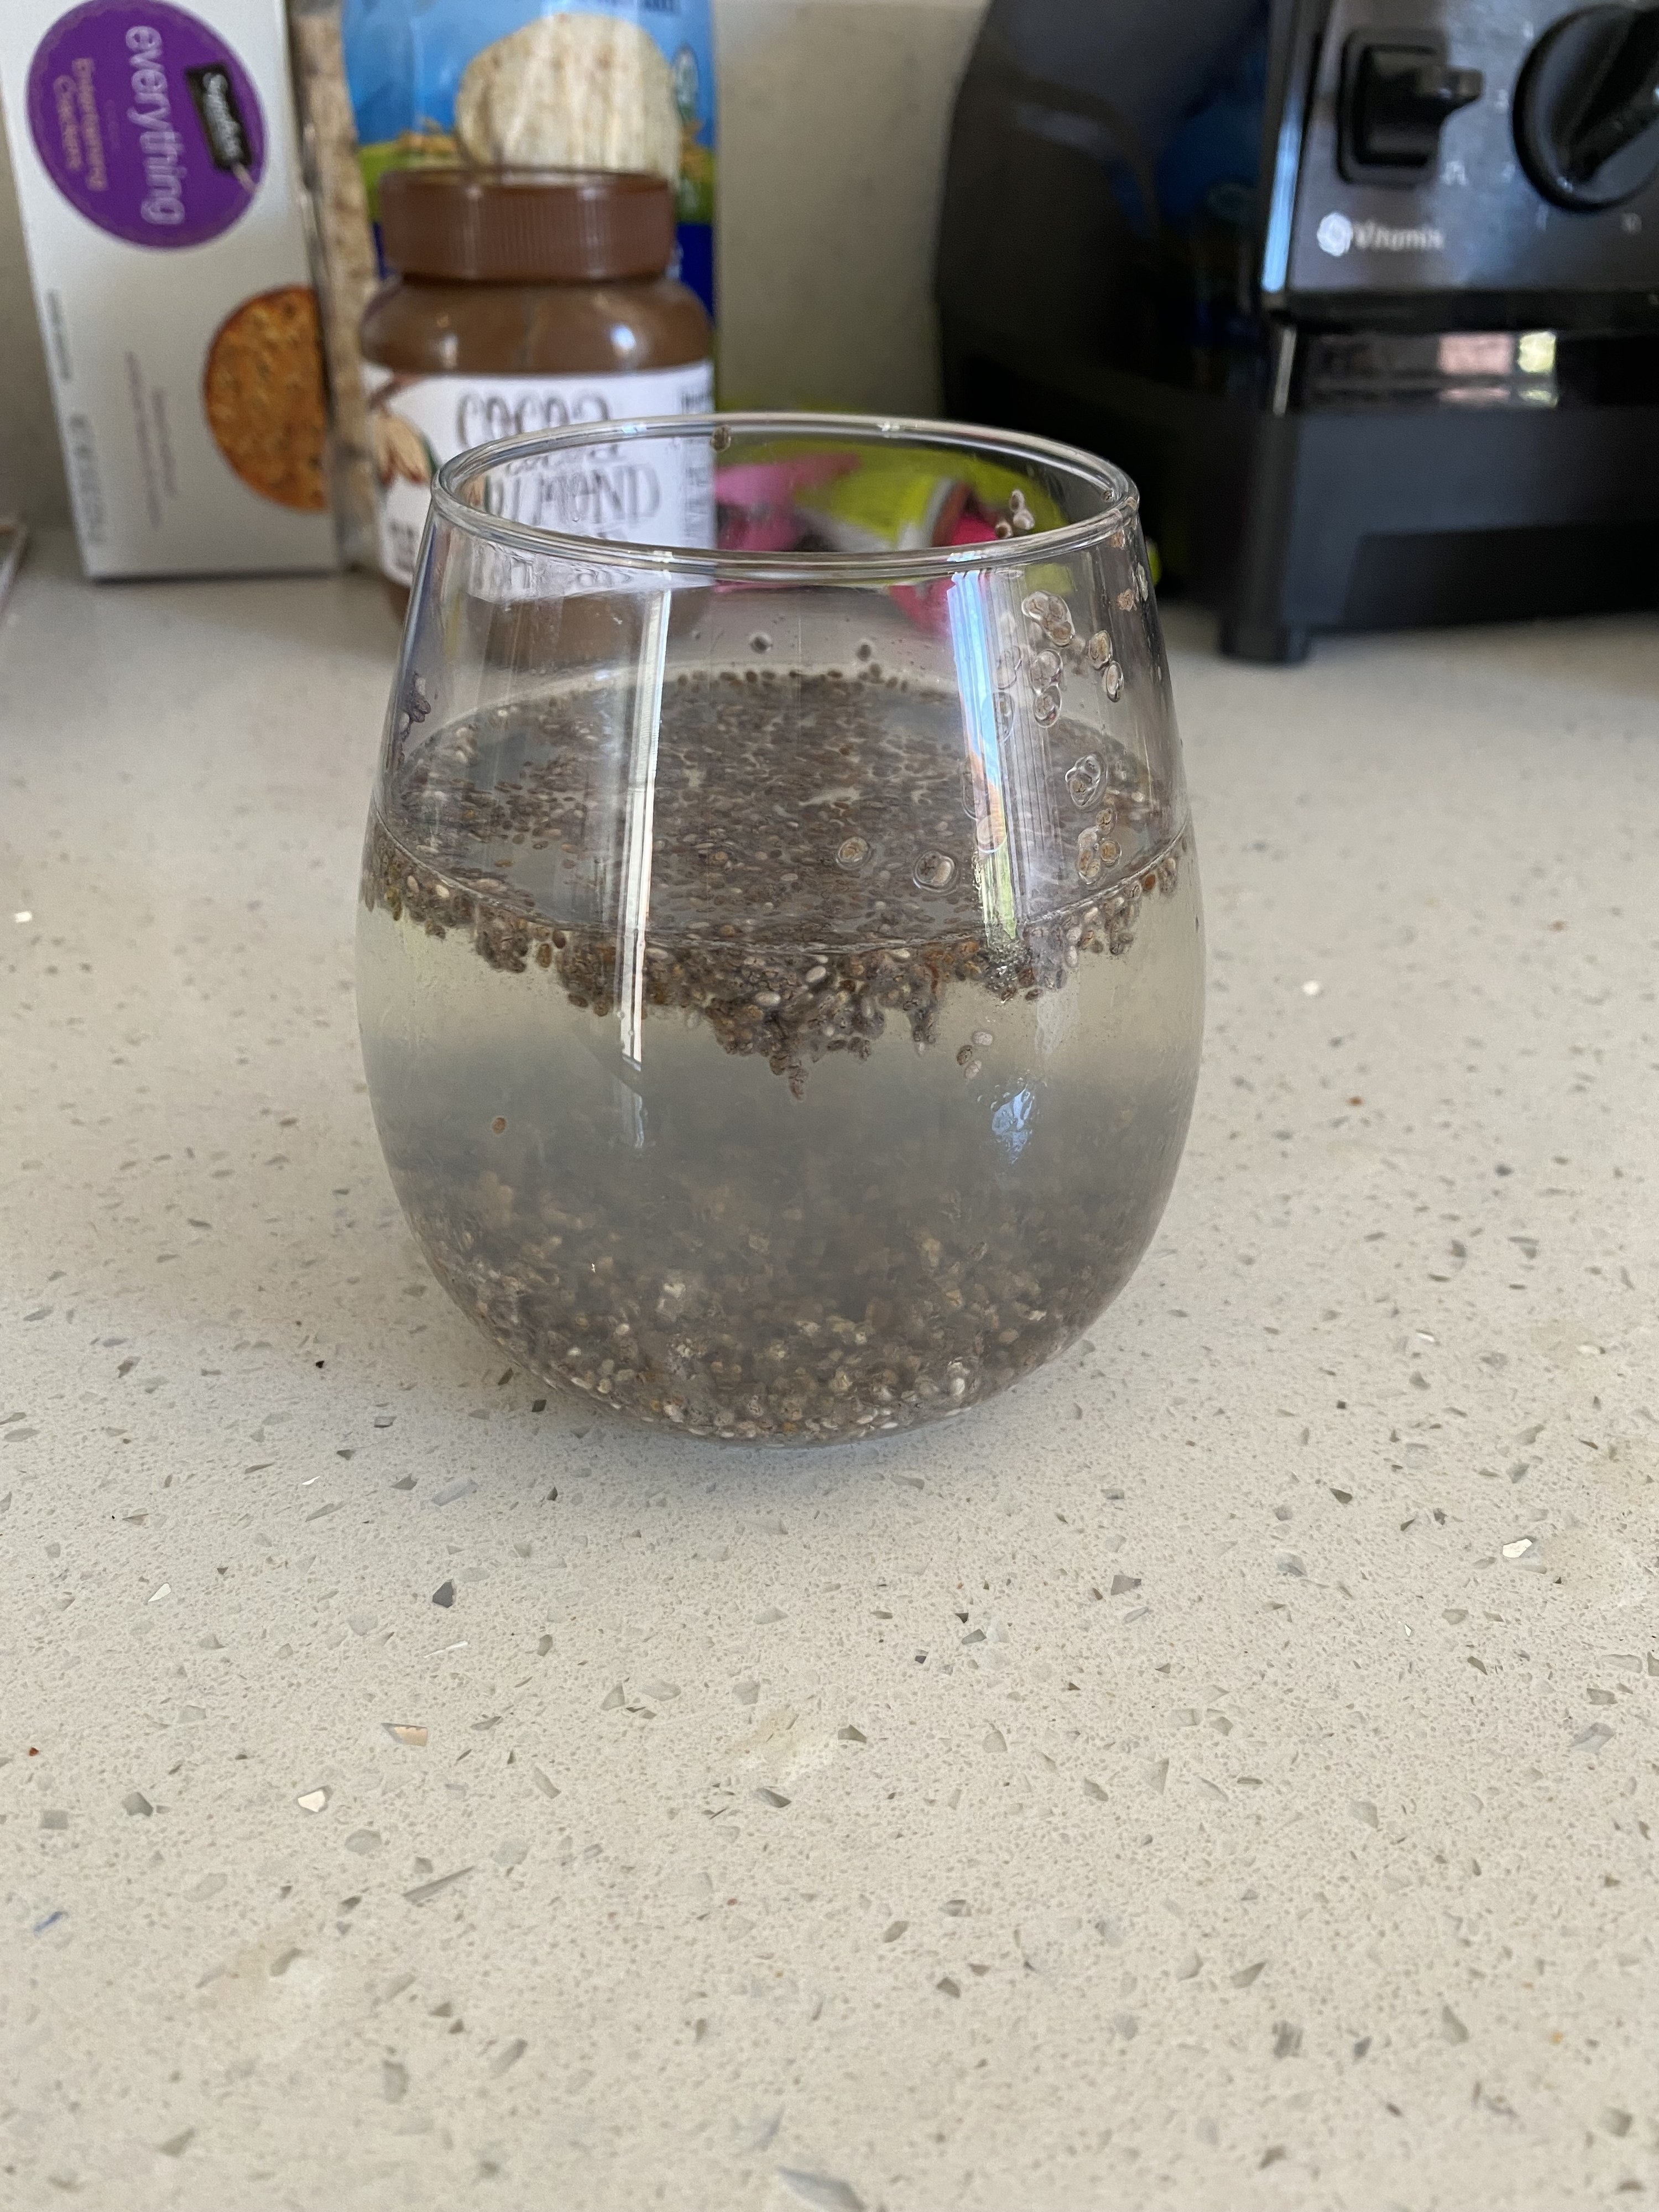 The previous half-full glass of water, but now most of the chia seeds have sunk to the bottom of the glass